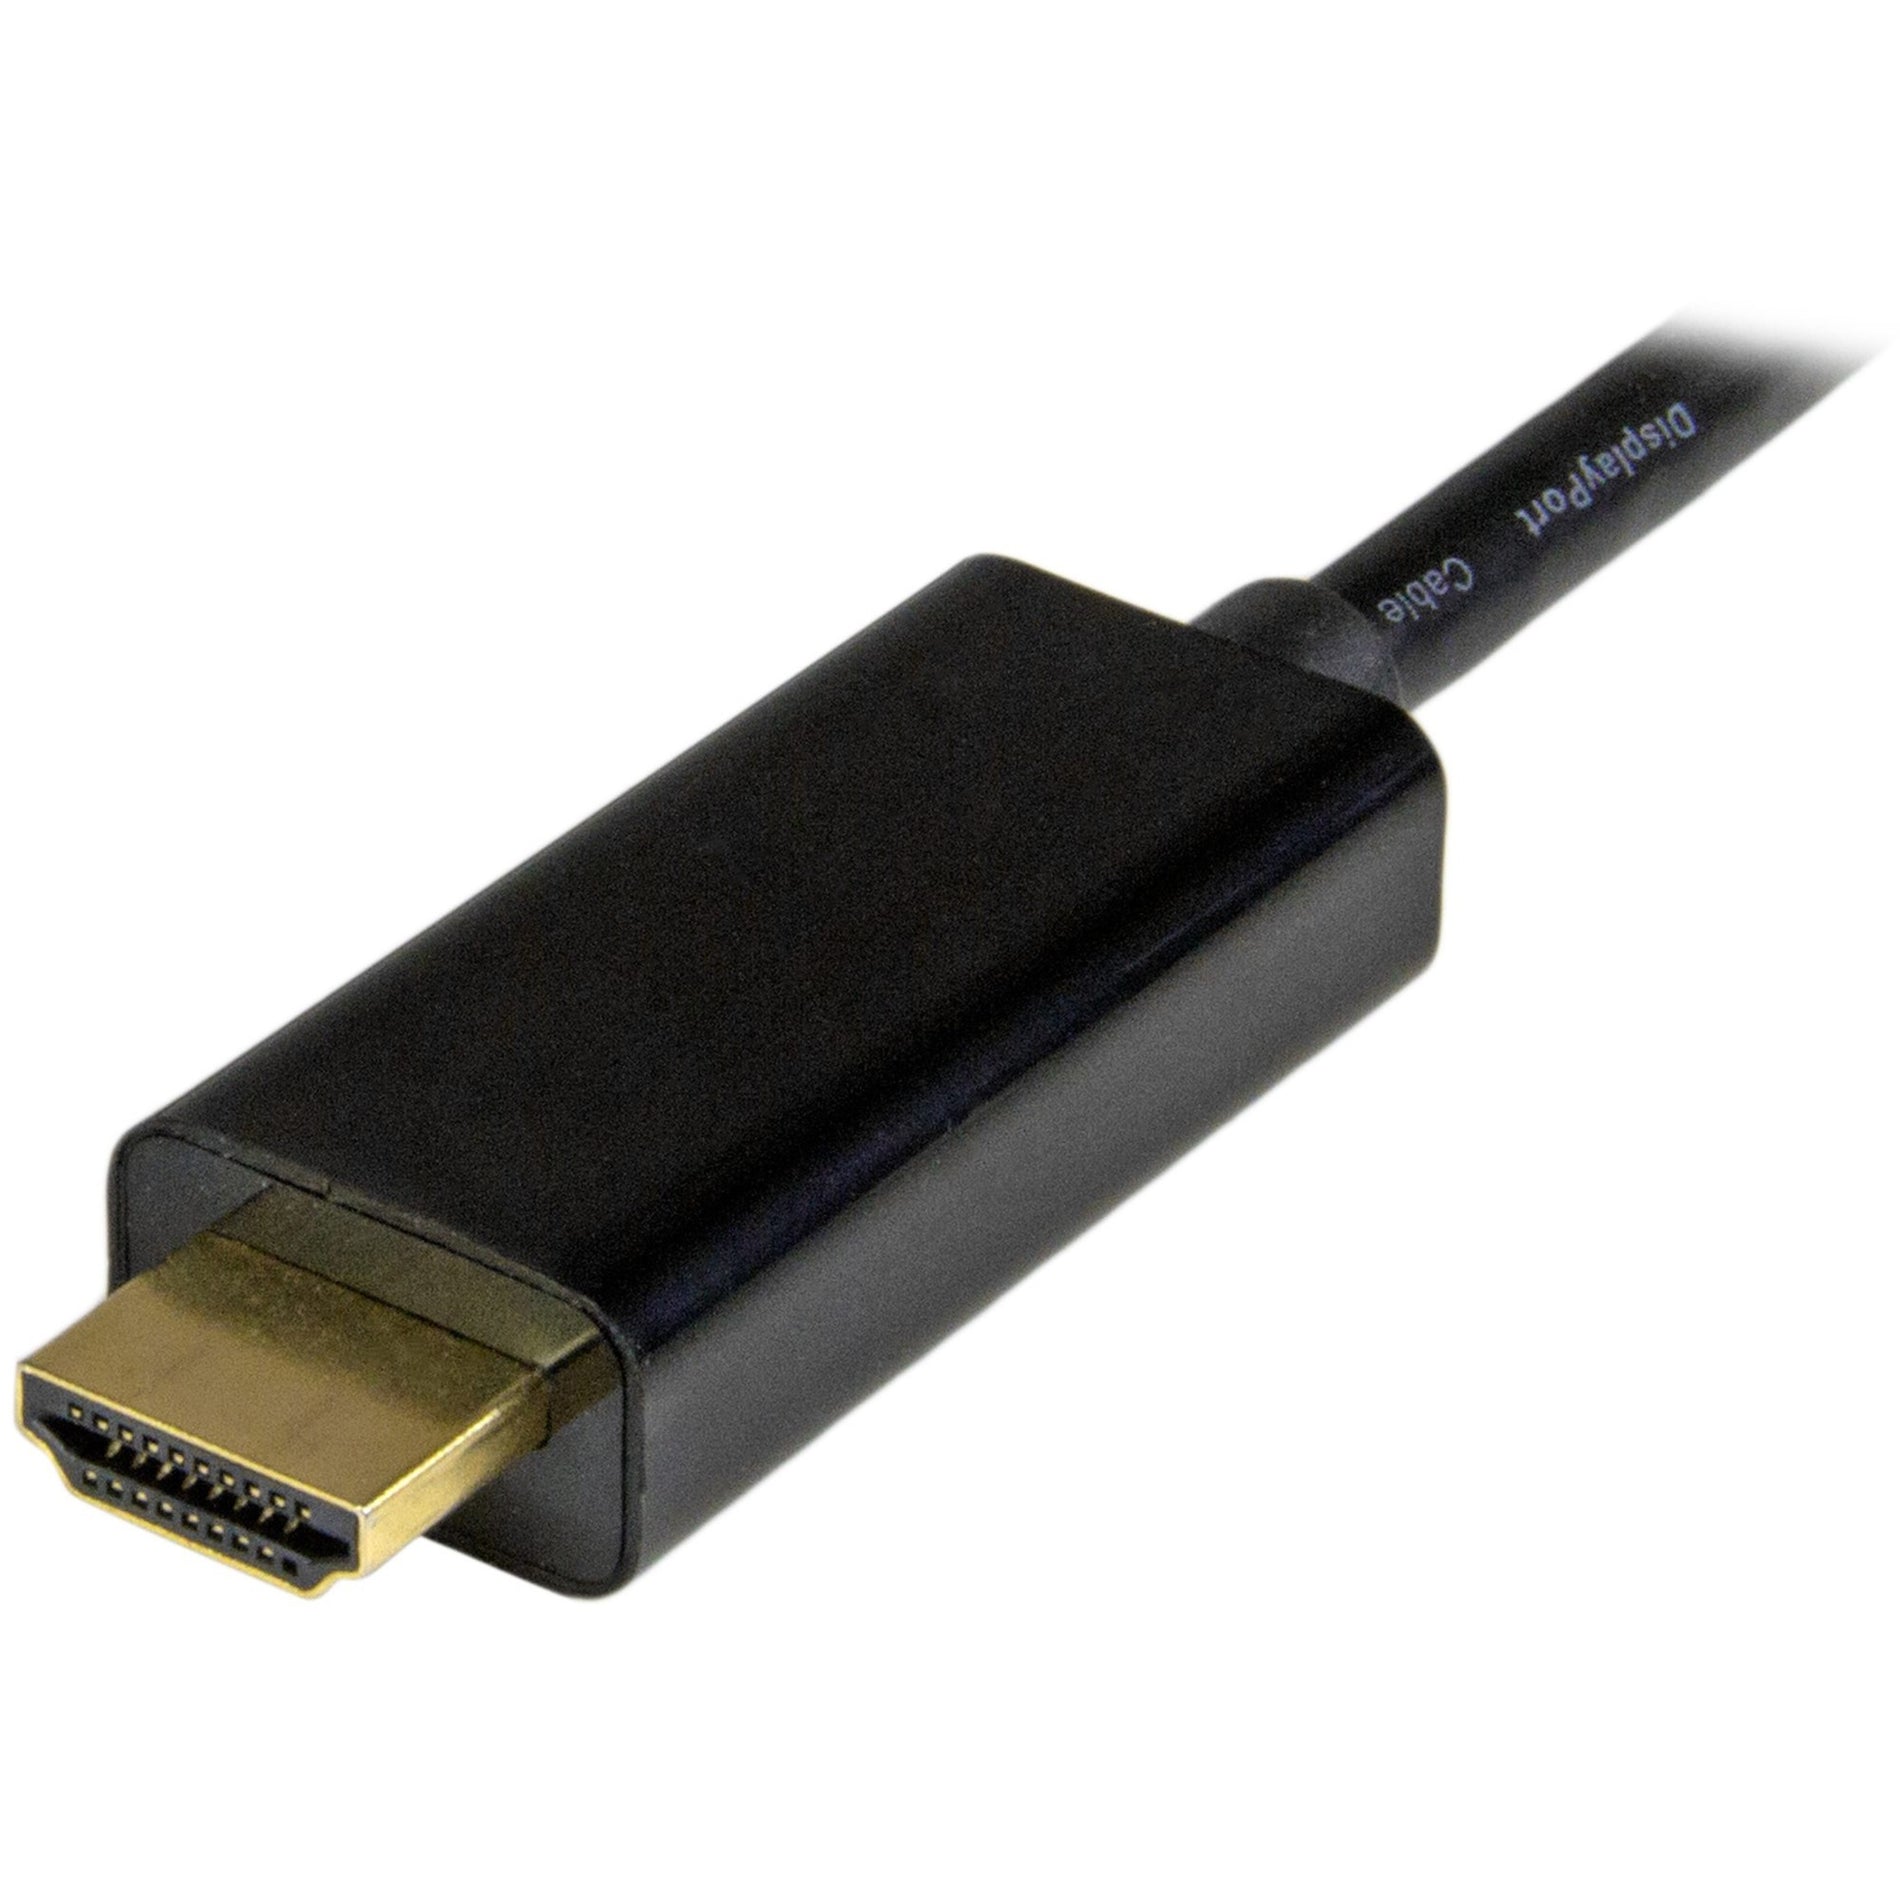 StarTech.com MDP2HDMM2MB Mini DisplayPort to HDMI Converter Cable - 6 ft (2m) - 4K, Connect Your Devices with Ease